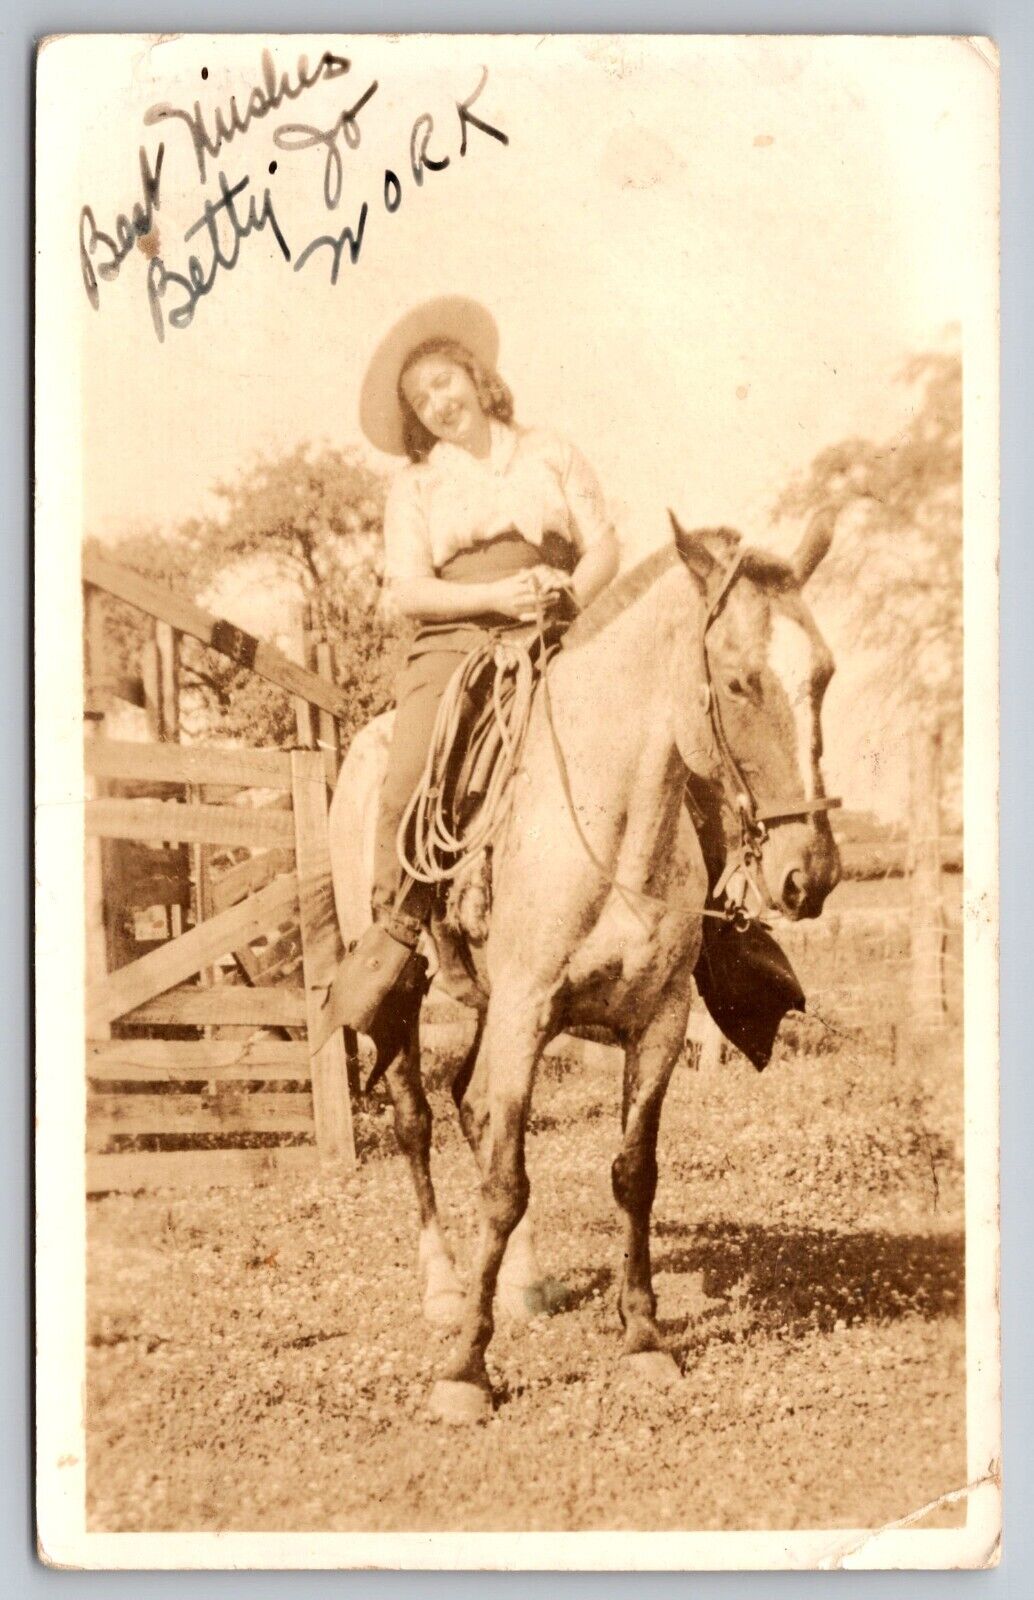 Betty Jo Work Rodeo Rangers Rodeo Cowgirl Postcard RPPC c1940s *Signed*